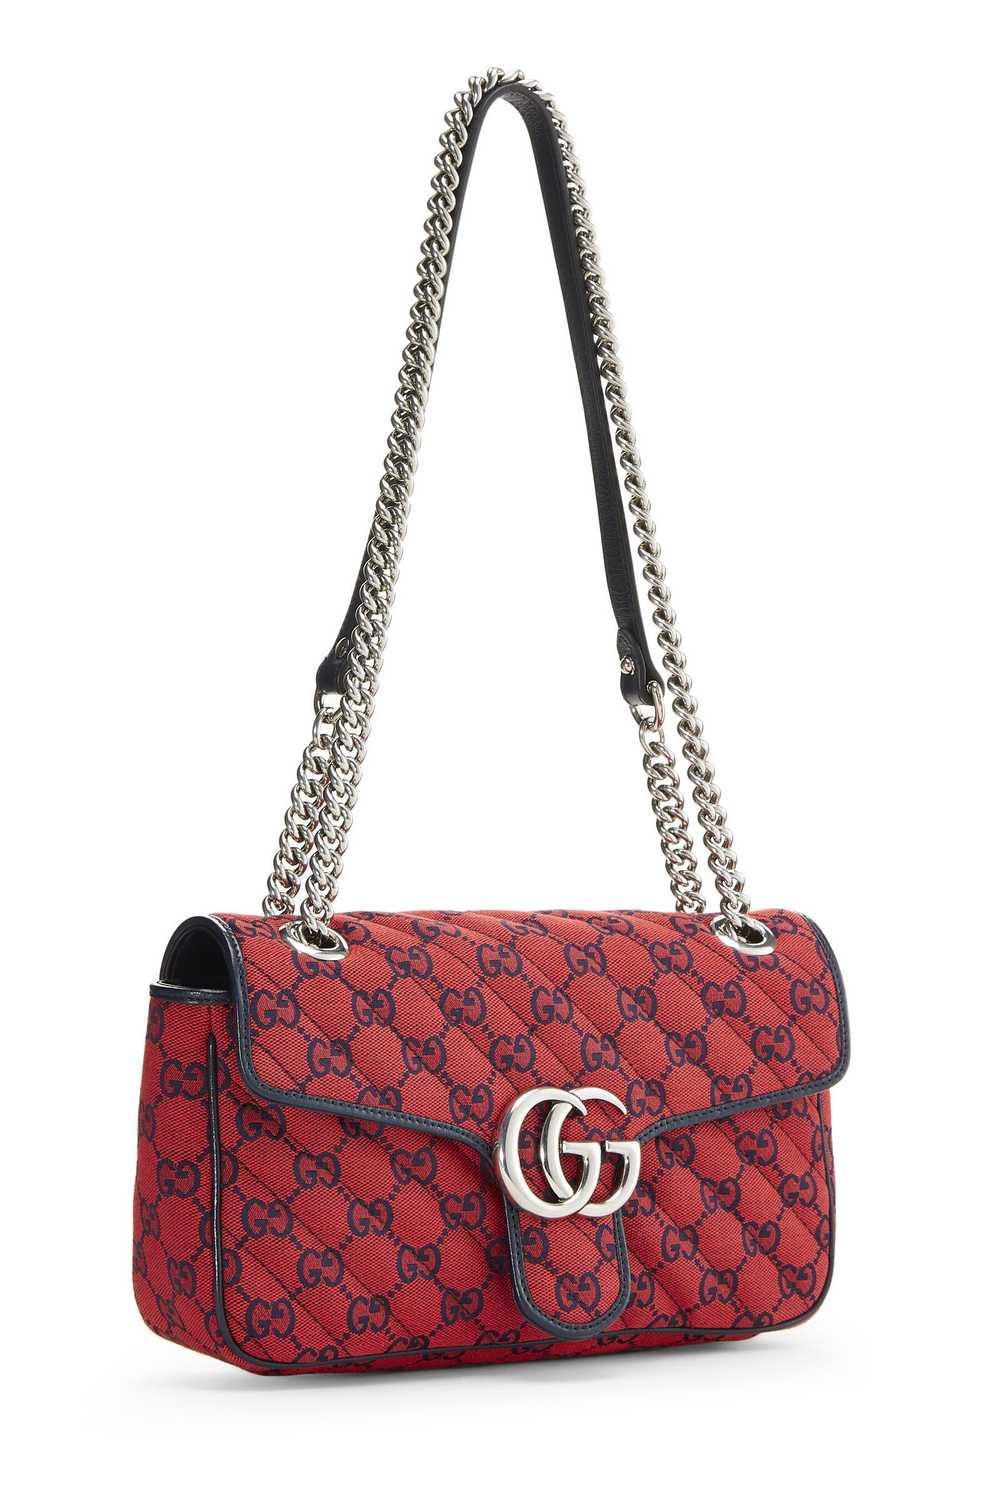 Red GG Canvas Marmont Shoulder Bag Small - image 2